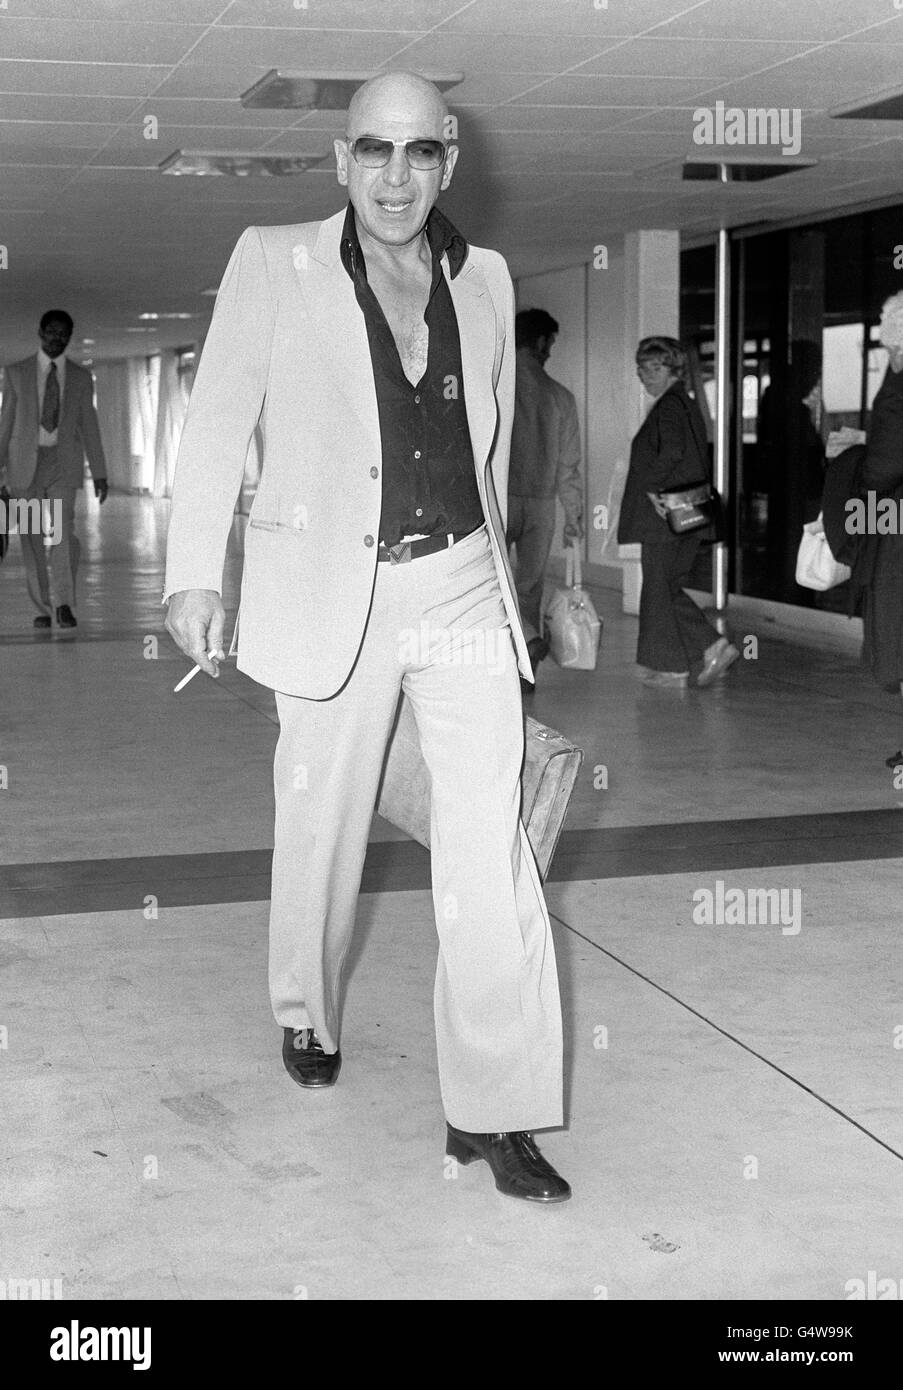 Actor Telly Savalas at London's Heathrow Airport after arriving from Los Angeles, California, USA, enroute for South Africa where he is to make a film. Stock Photo